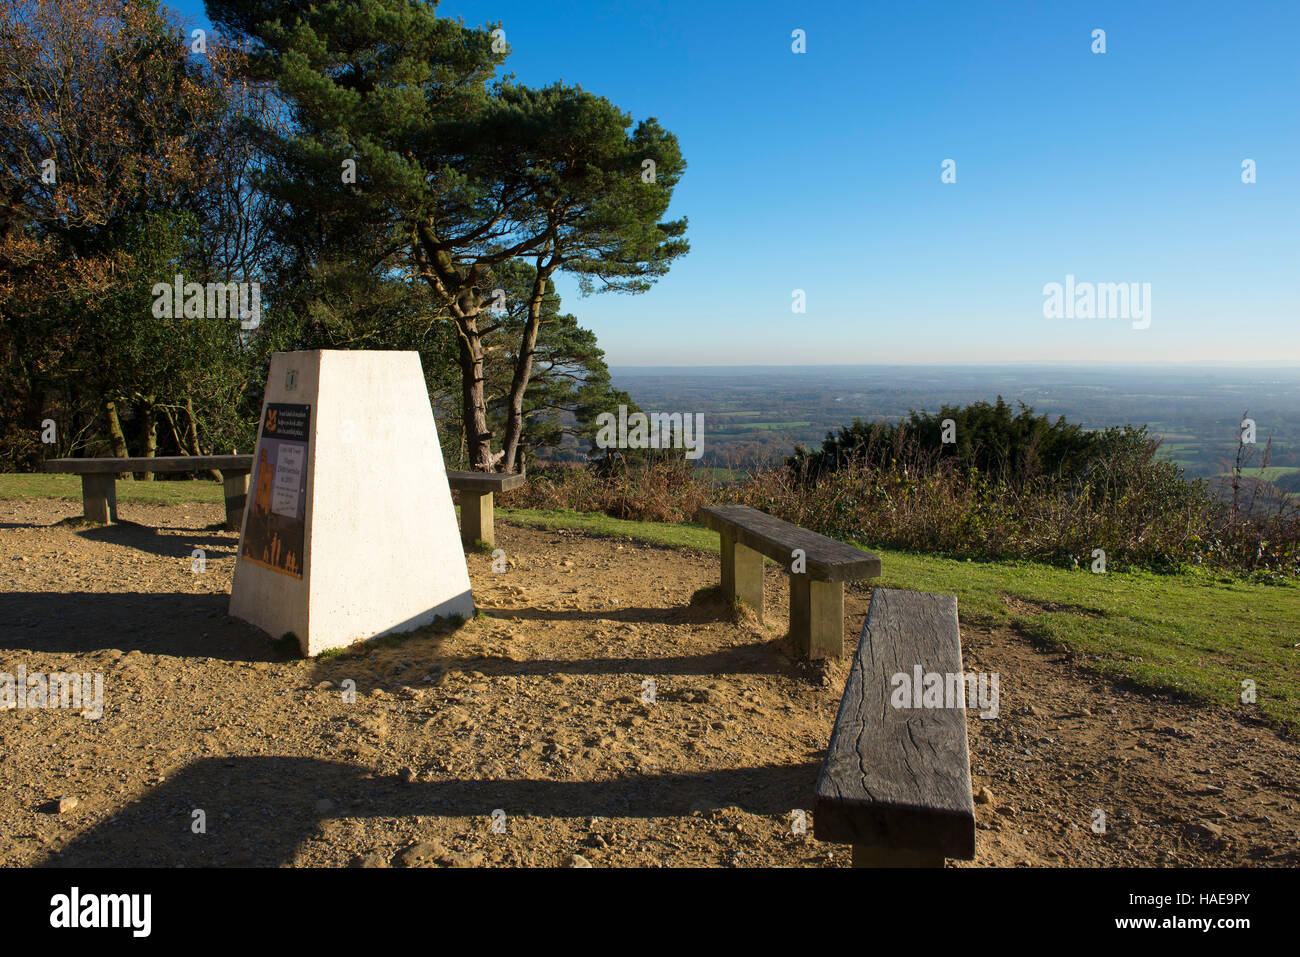 The trig point on Leith Hill adjacent to the tower looking out to the Surrey countryside in autumn Stock Photo